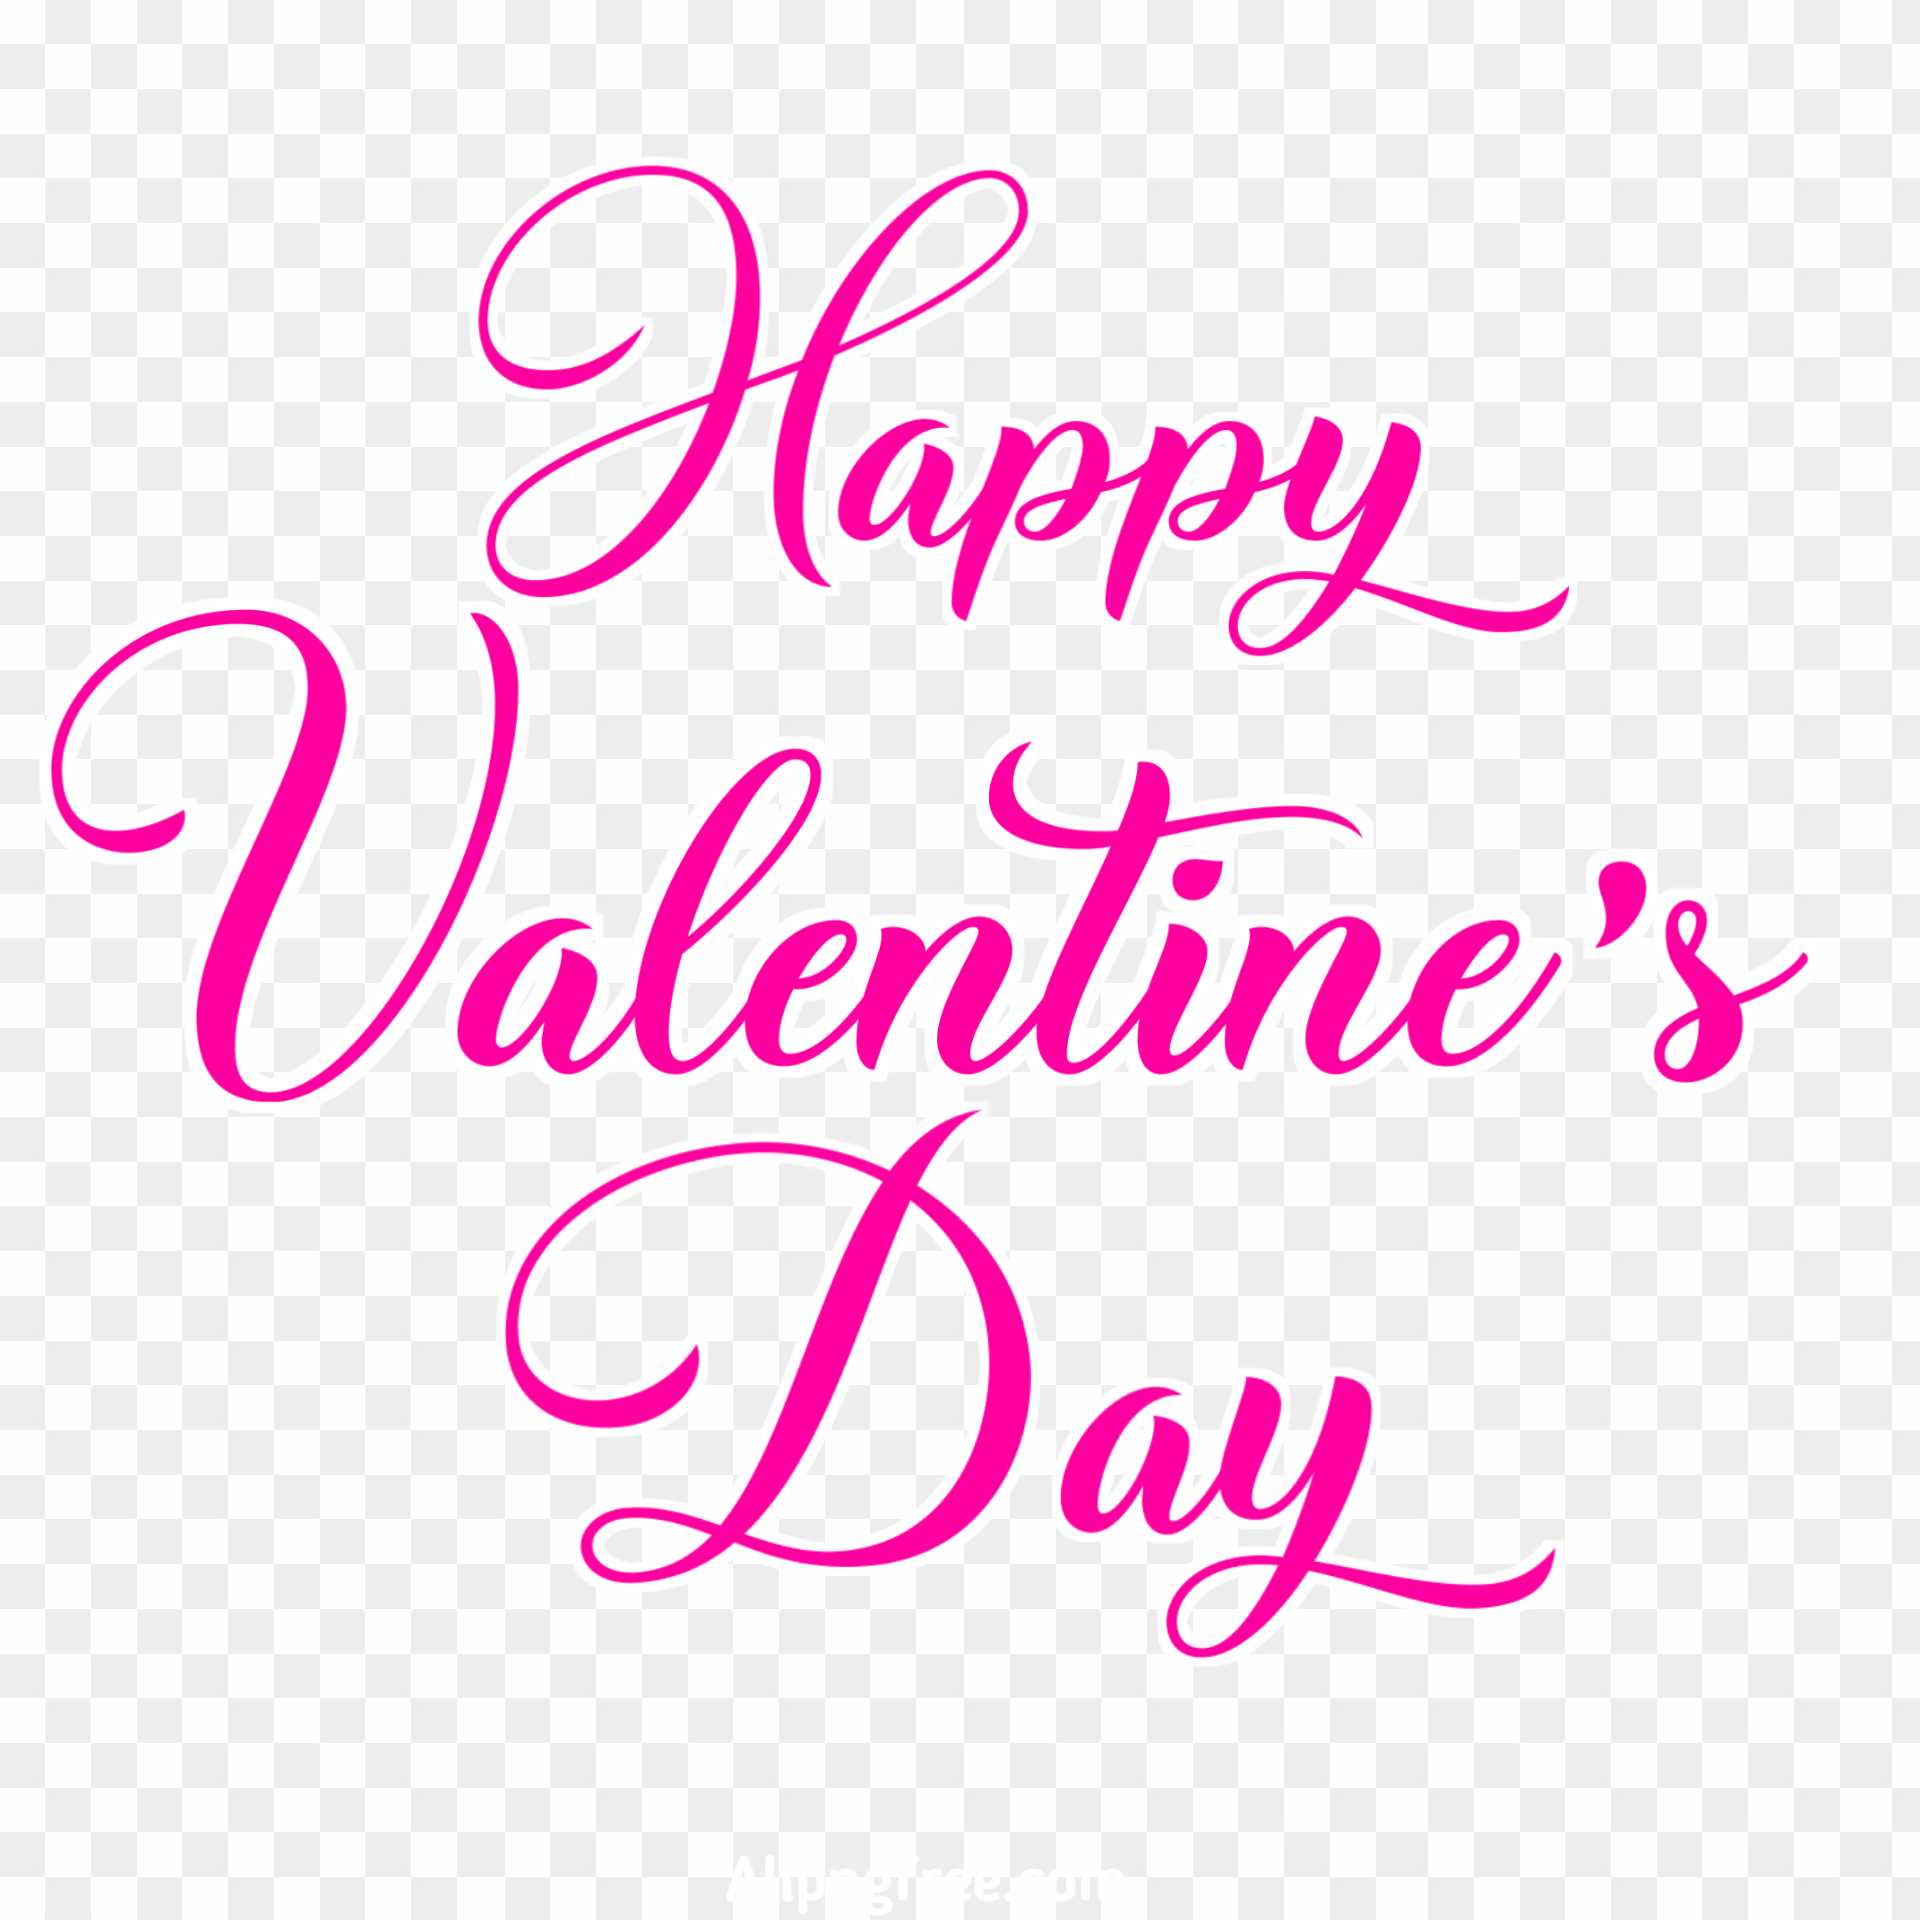 Happy valentine Day PNG transparent images